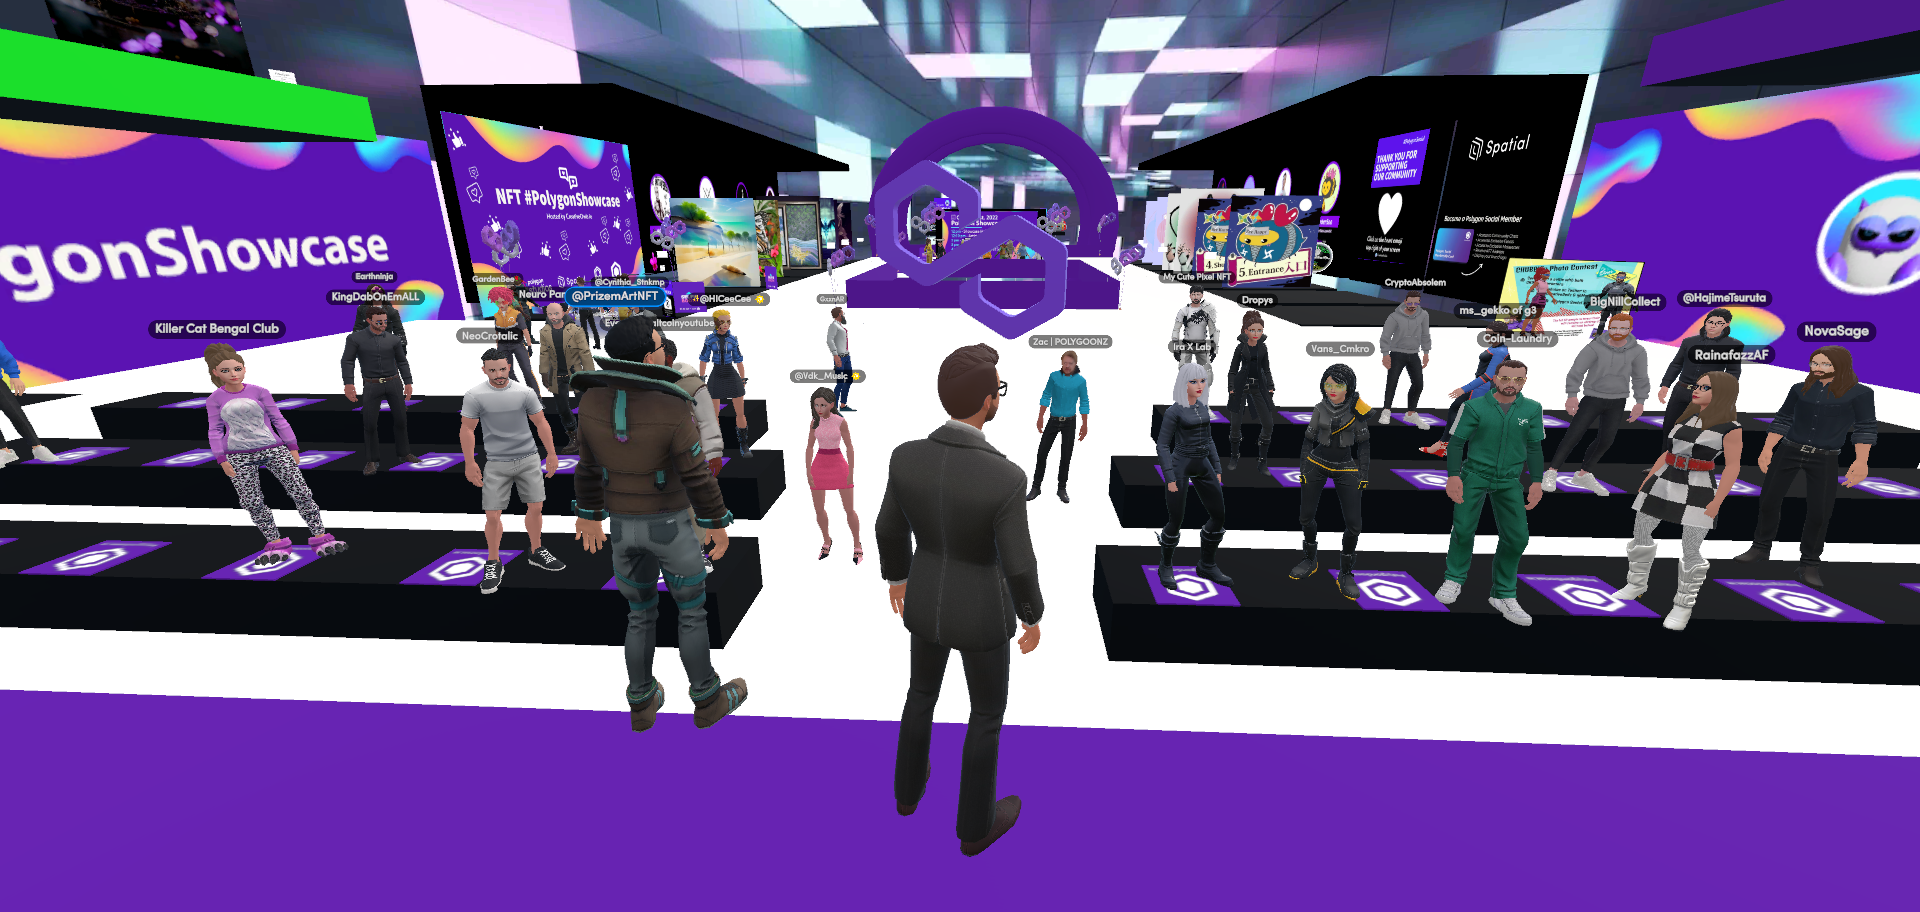 10 Tips for Hosting Events in the Metaverse